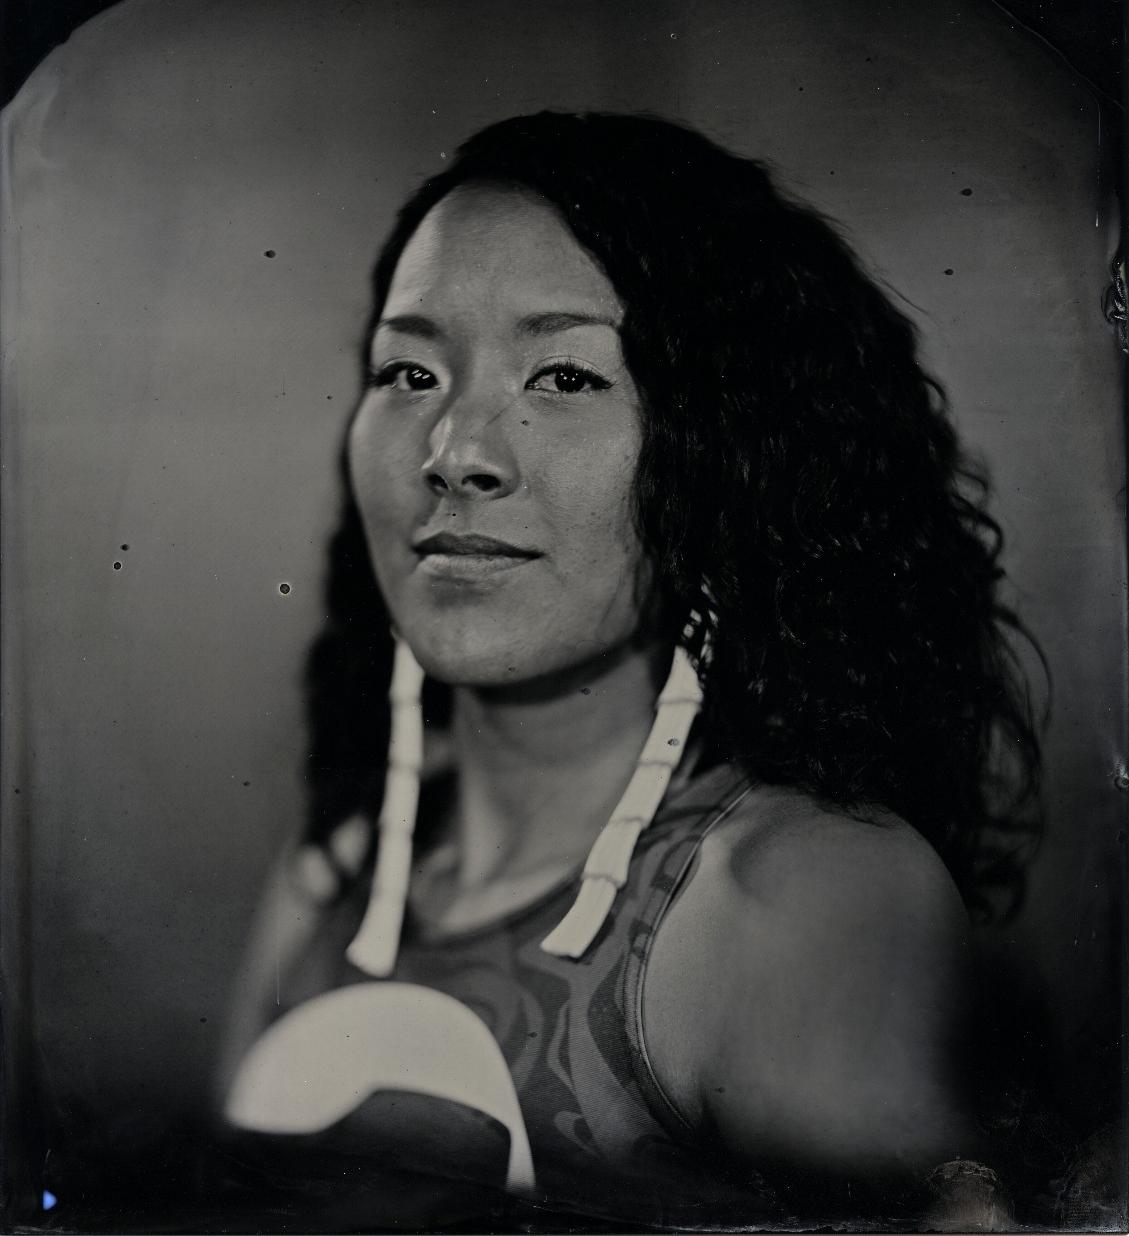 Will Wilson, Diné, b. 1969, "Talking Tintype, Crystal Worl, Artist, Tlingit Athabascan," 2018